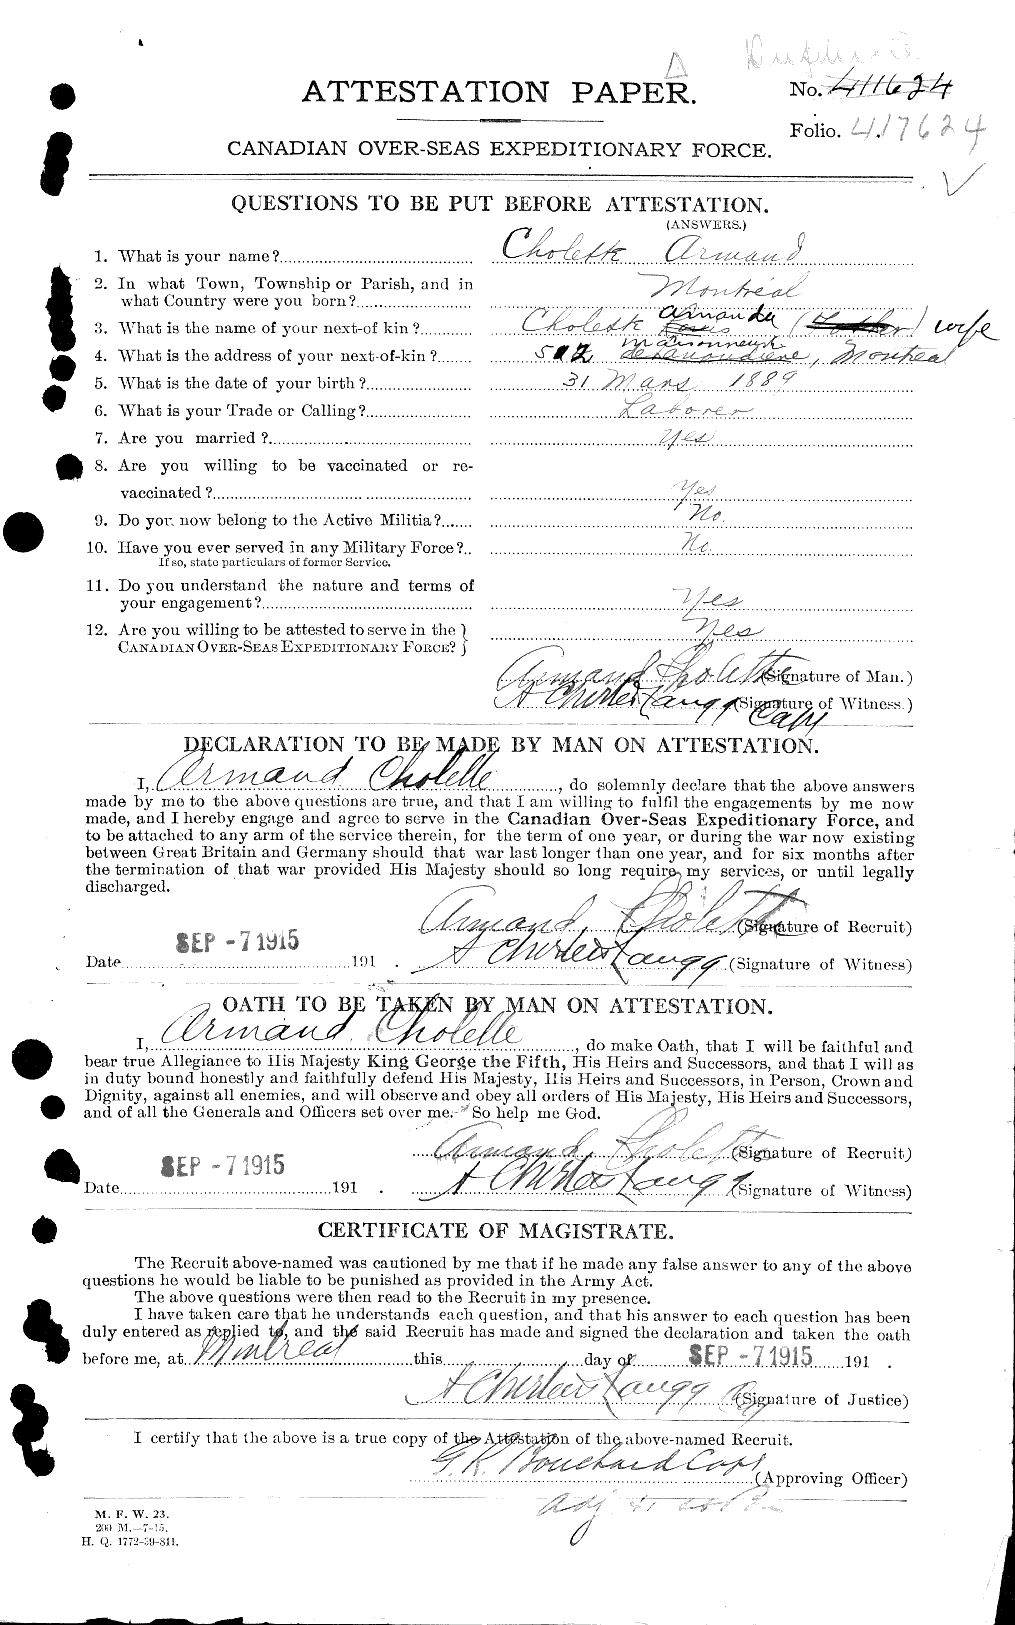 Personnel Records of the First World War - CEF 018455a